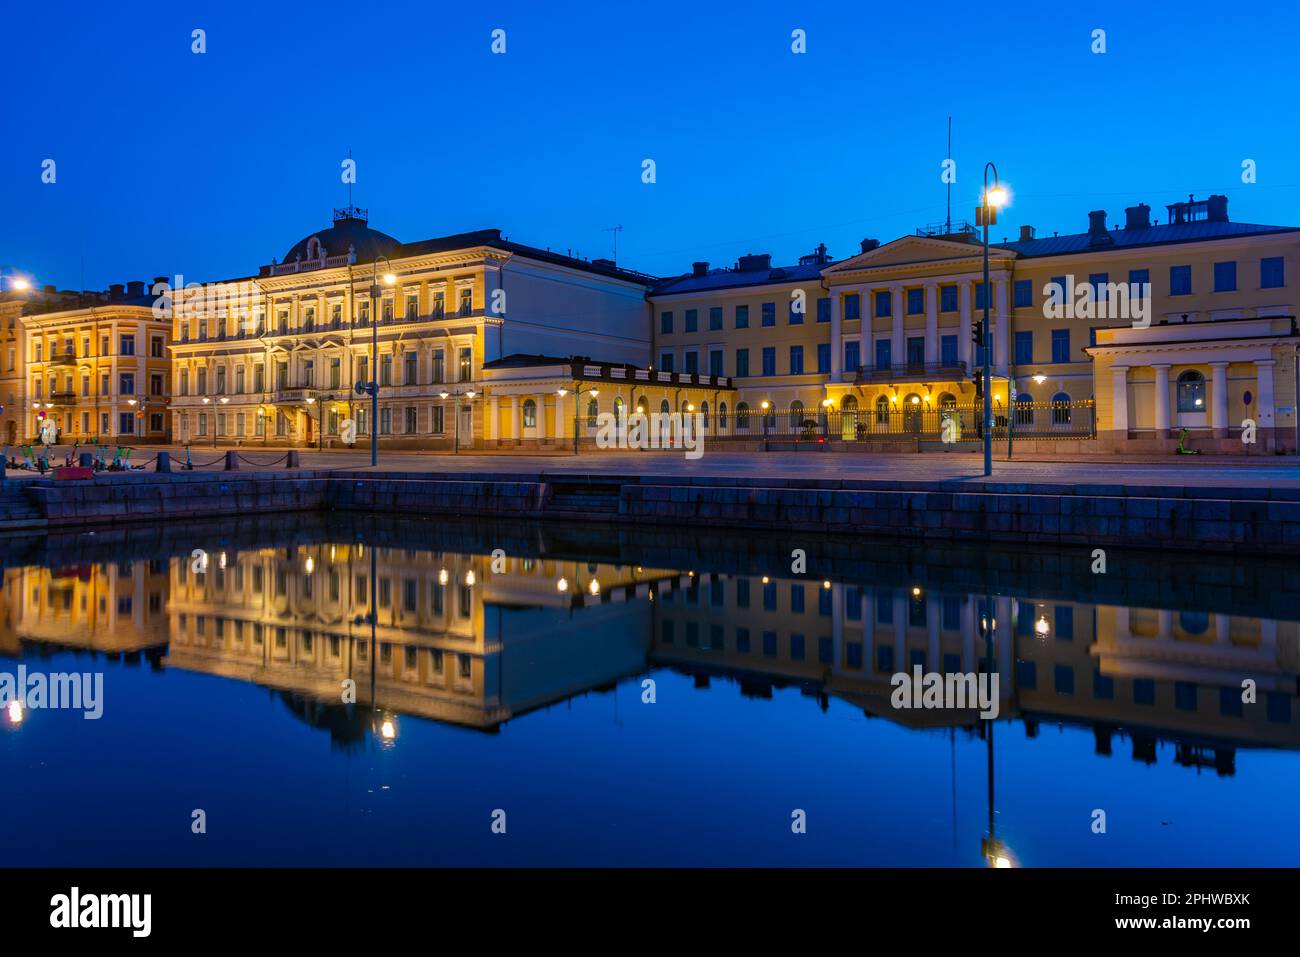 Sunrise view of the presidential palace in Helsinki, Finland . Stock Photo